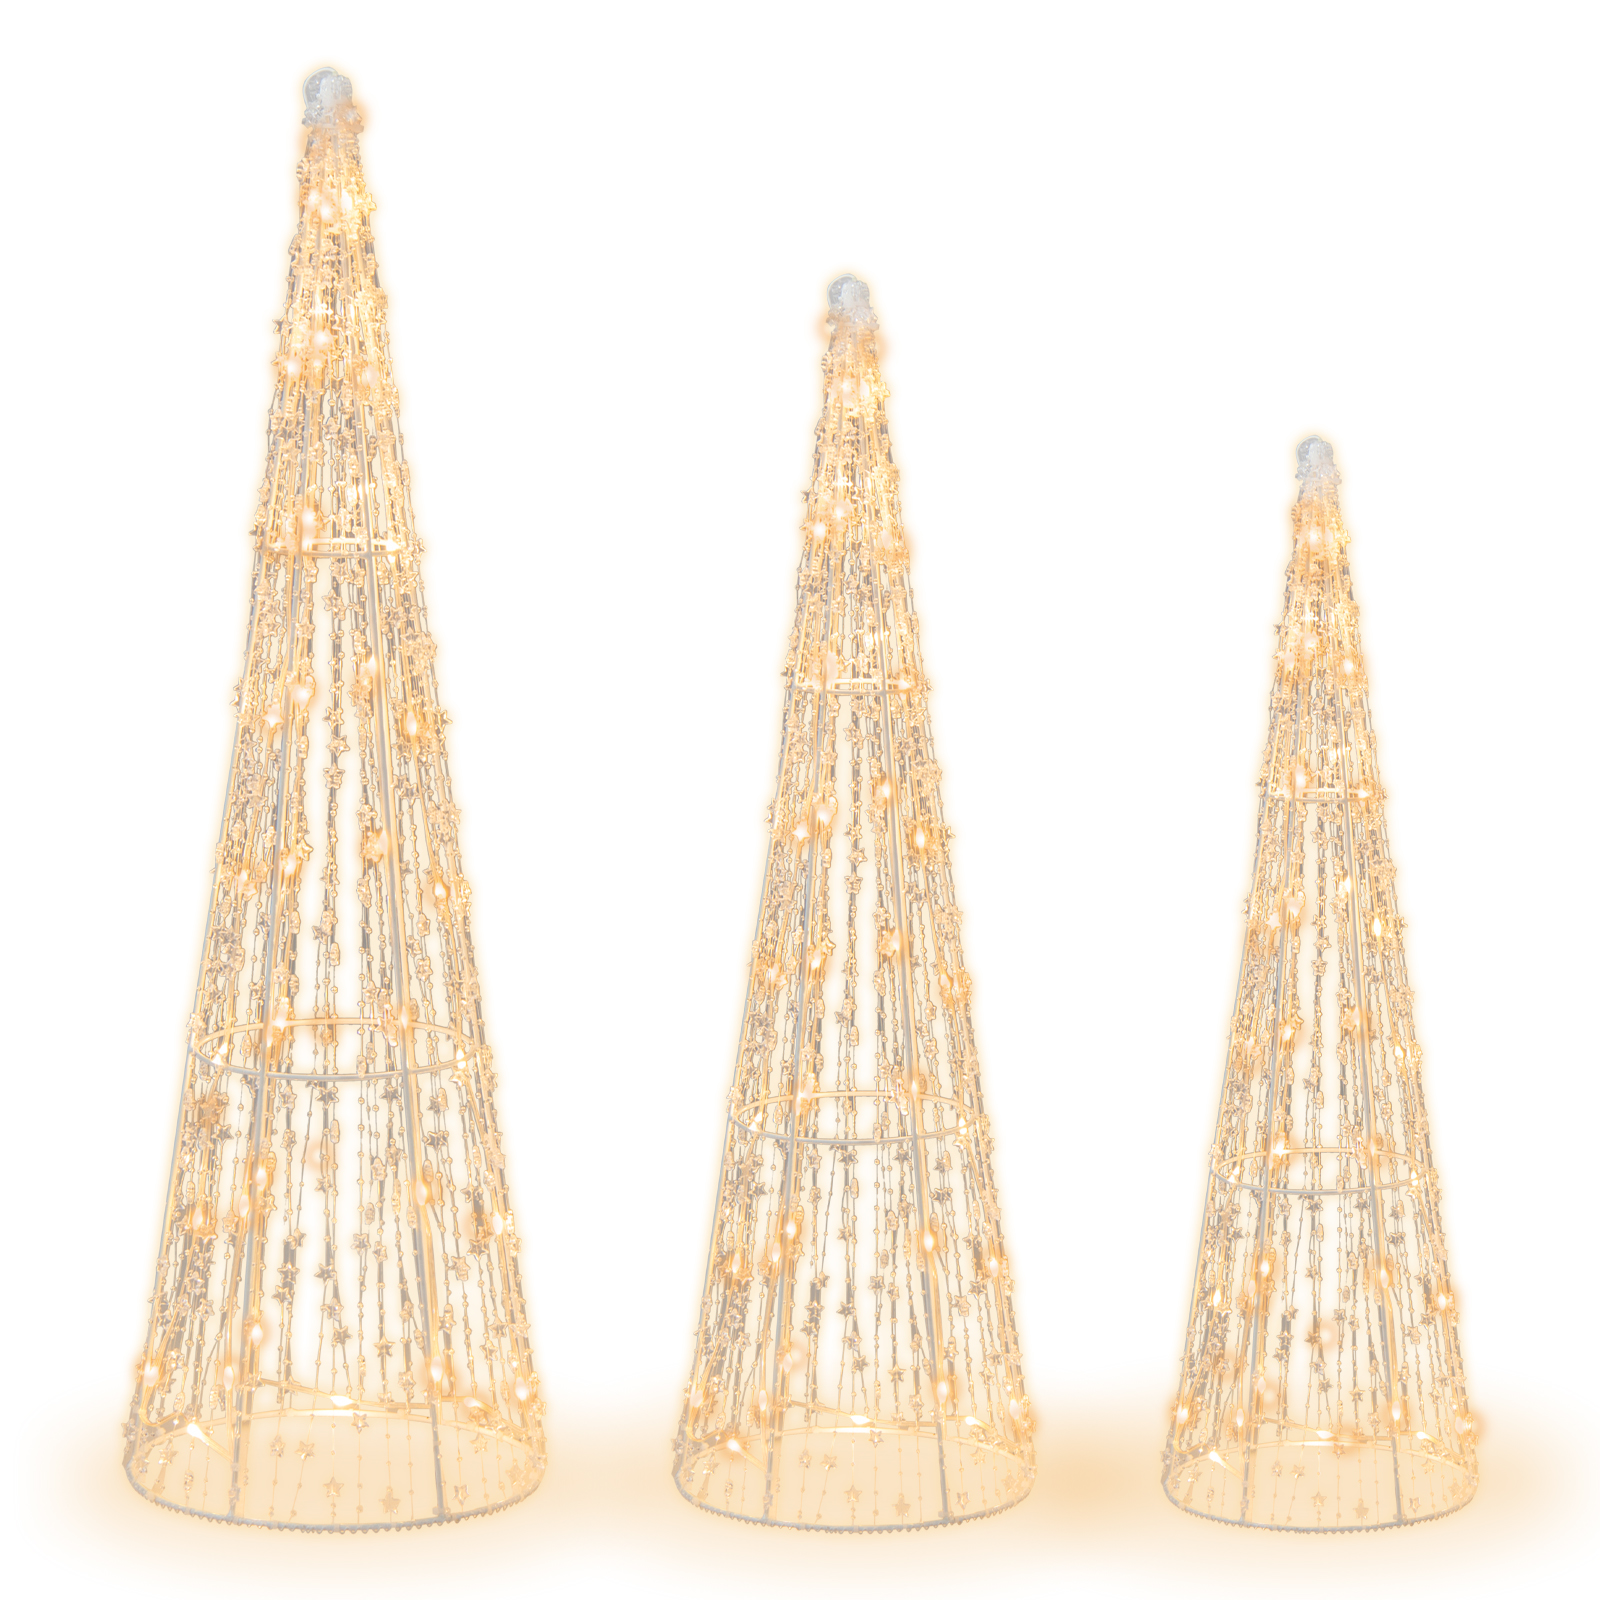 Set of 3 Pre-lit Christmas Cone Trees with Star Strings